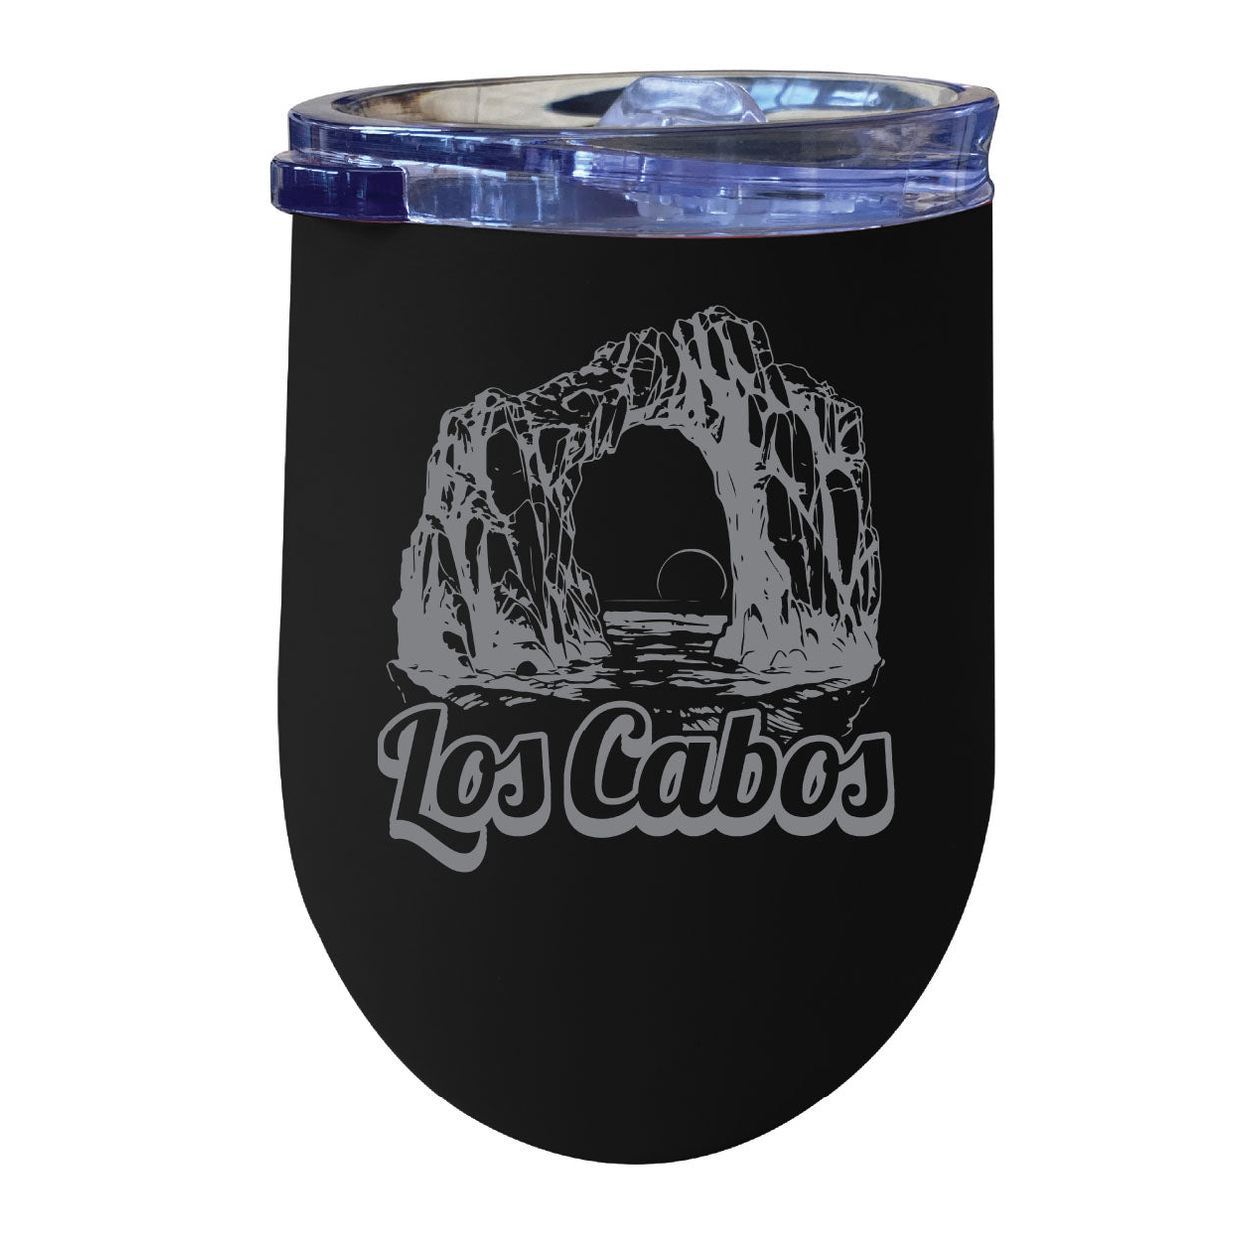 Los Cabos Mexico Souvenir 12 Oz Engraved Insulated Wine Stainless Steel Tumbler - Black,,4-Pack